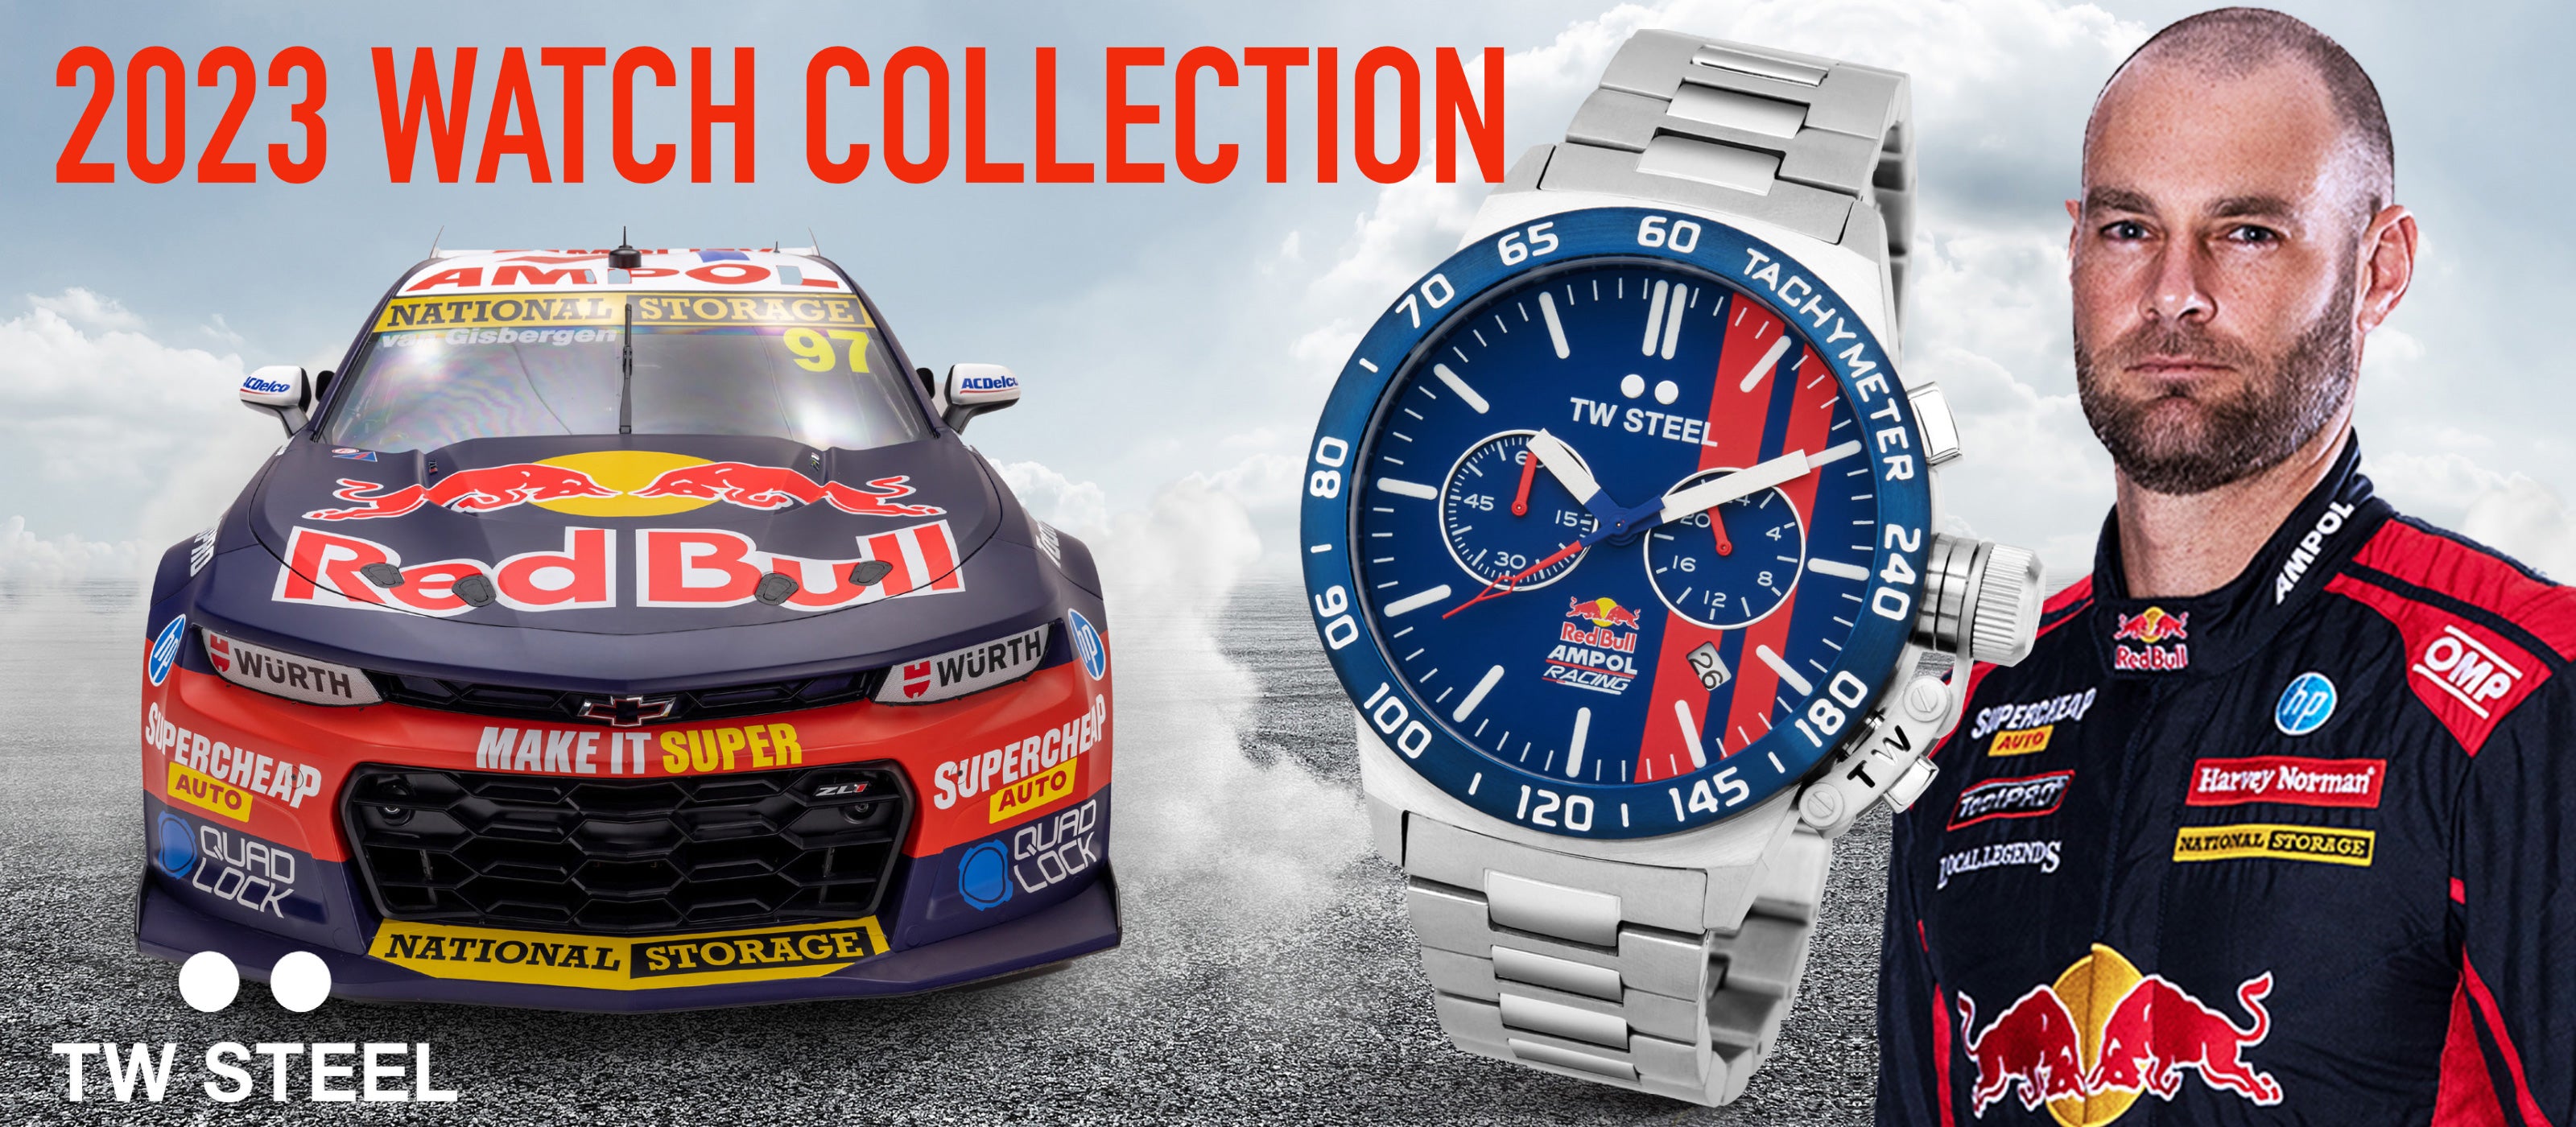 TW STEEL AMPOL RED BULL RACING 2023 WATCH COLLECTION